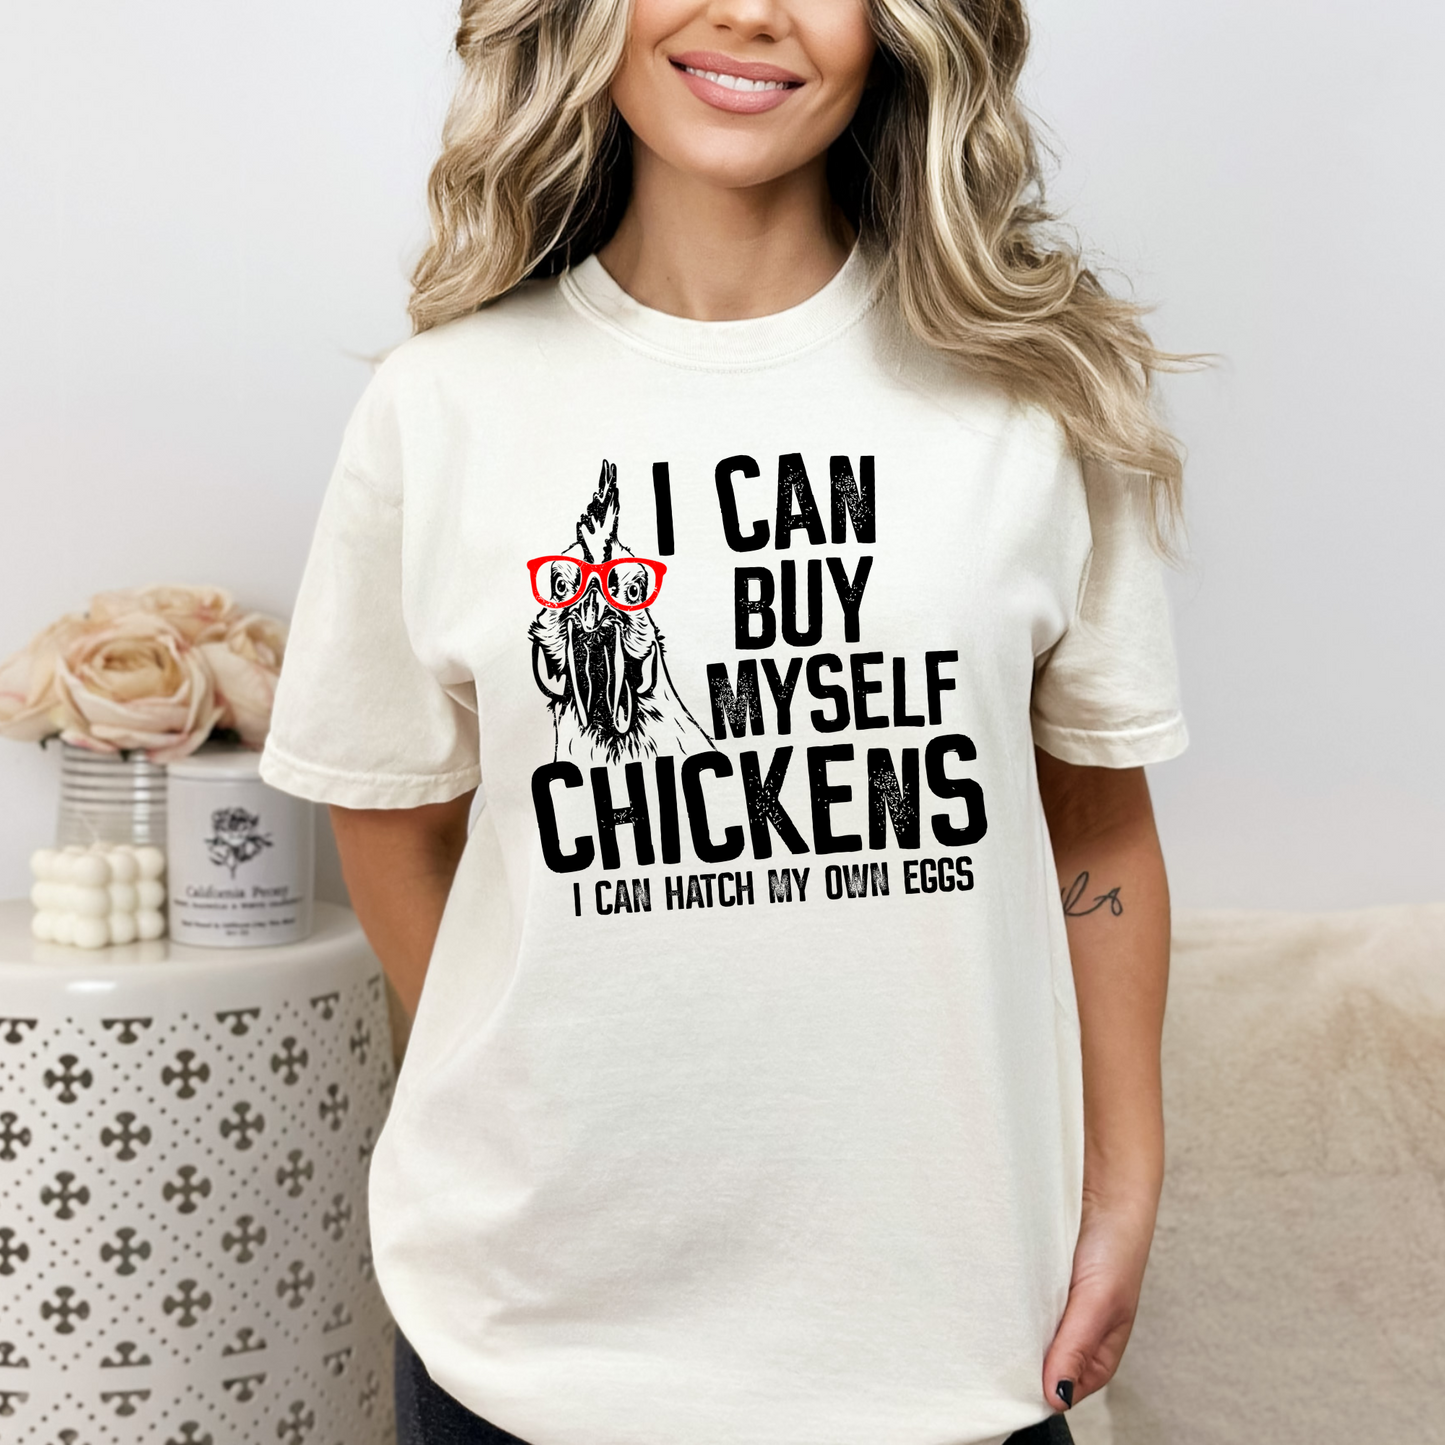 I can buy myself chickens tee